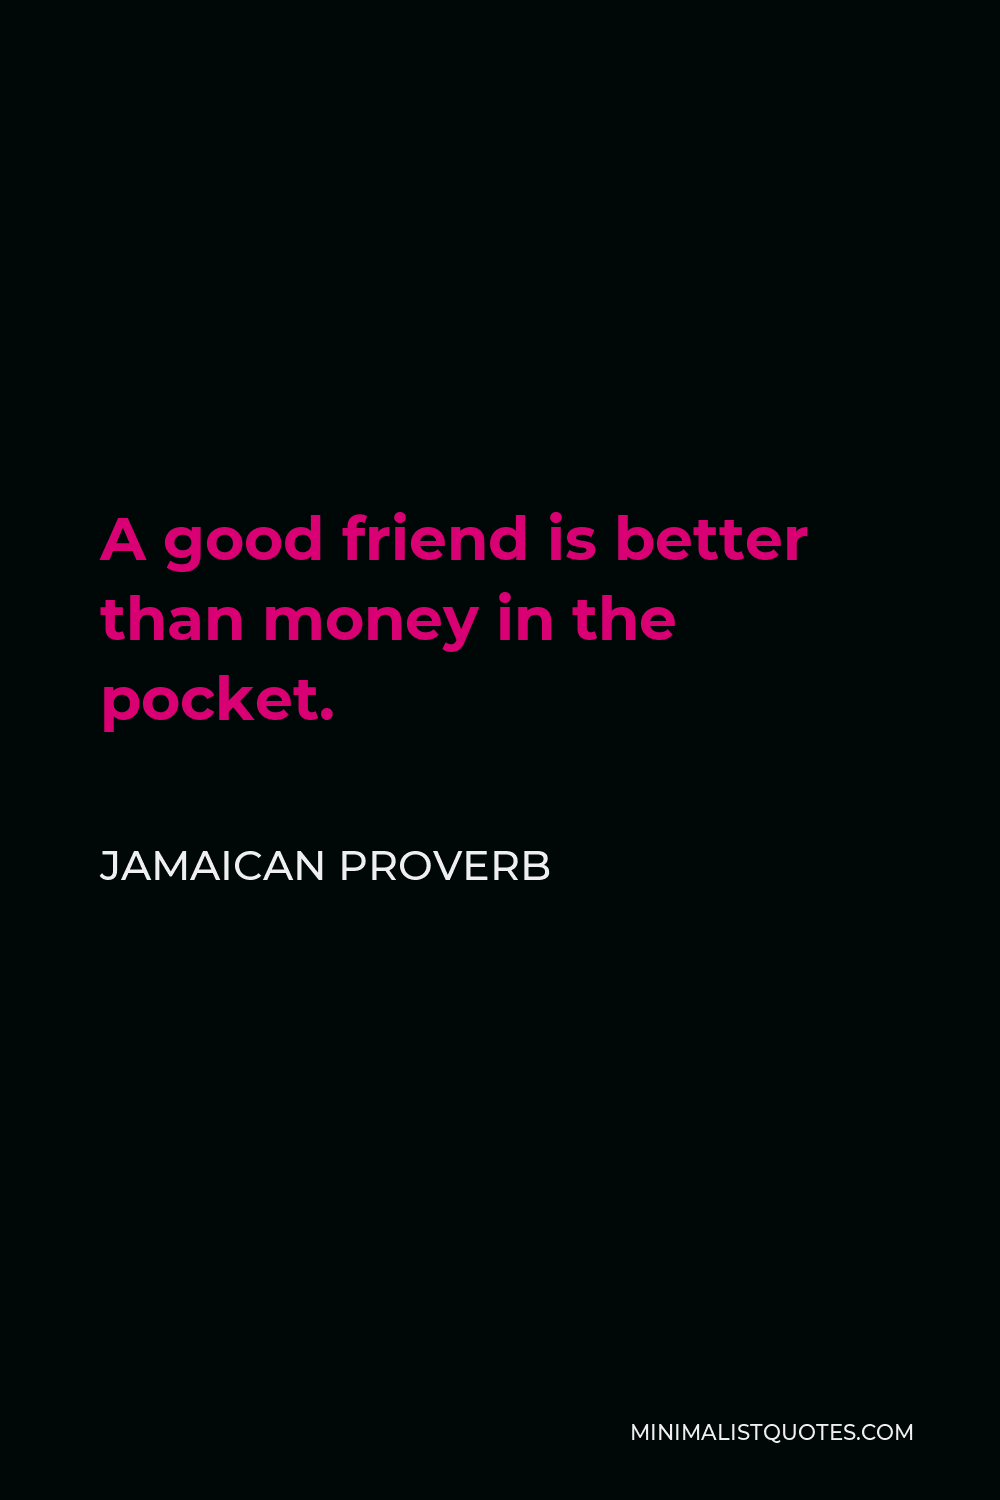 Jamaican Proverb Quote - A good friend is better than money in the pocket.